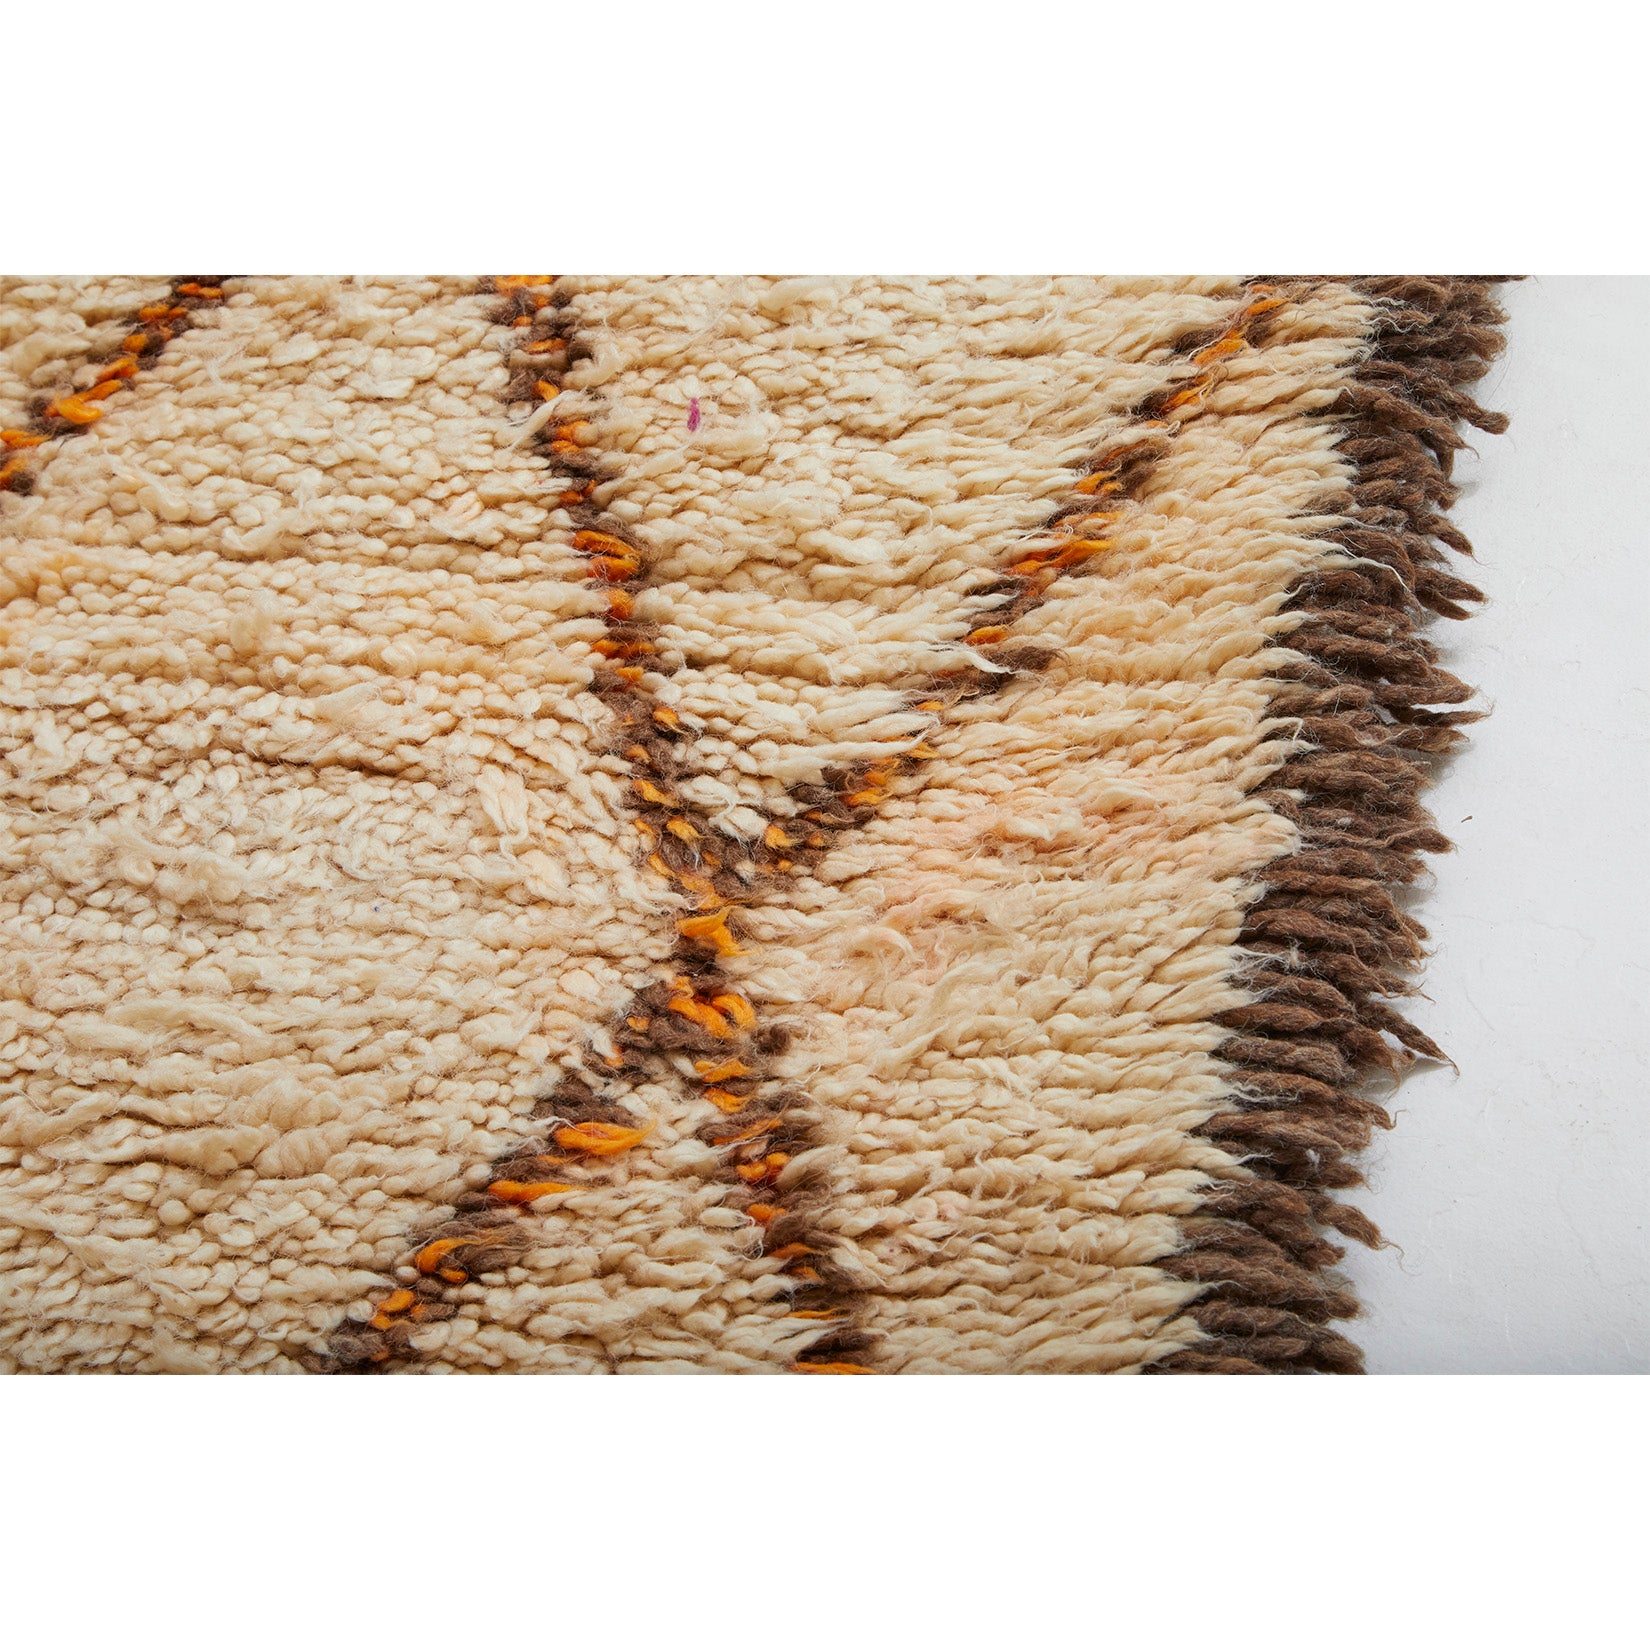 Detail of large ivory-colored Moroccan berber rug in beni ourain style - Kantara | Moroccan Rugs